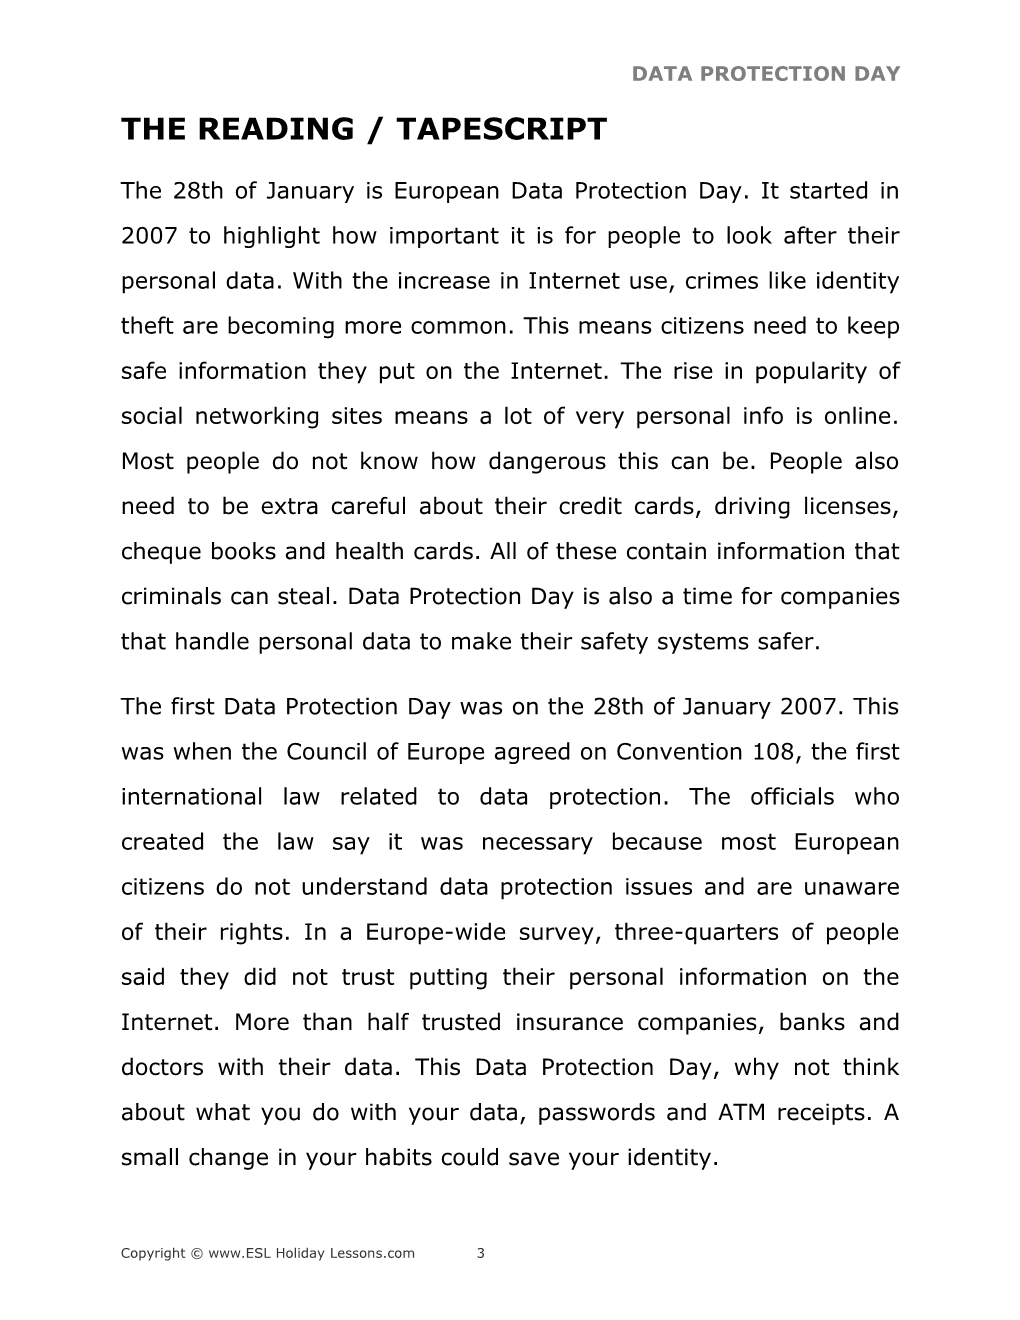 Holiday Lessons - Data Protection Day